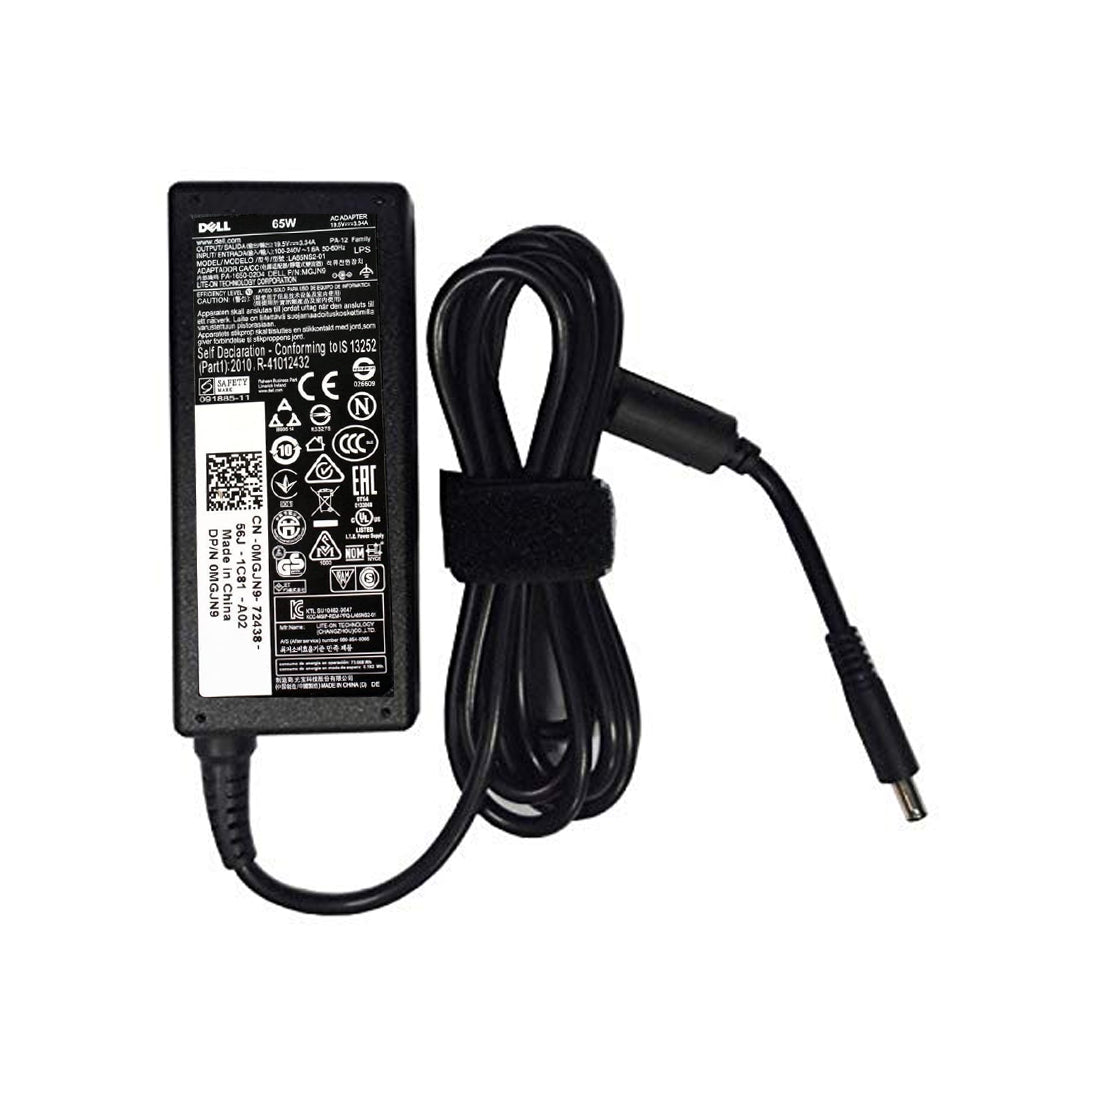 Dell Original 65W 19.5V 4.5mm Pin Laptop Charger Adapter for XPS 13 9343 With Power Cord